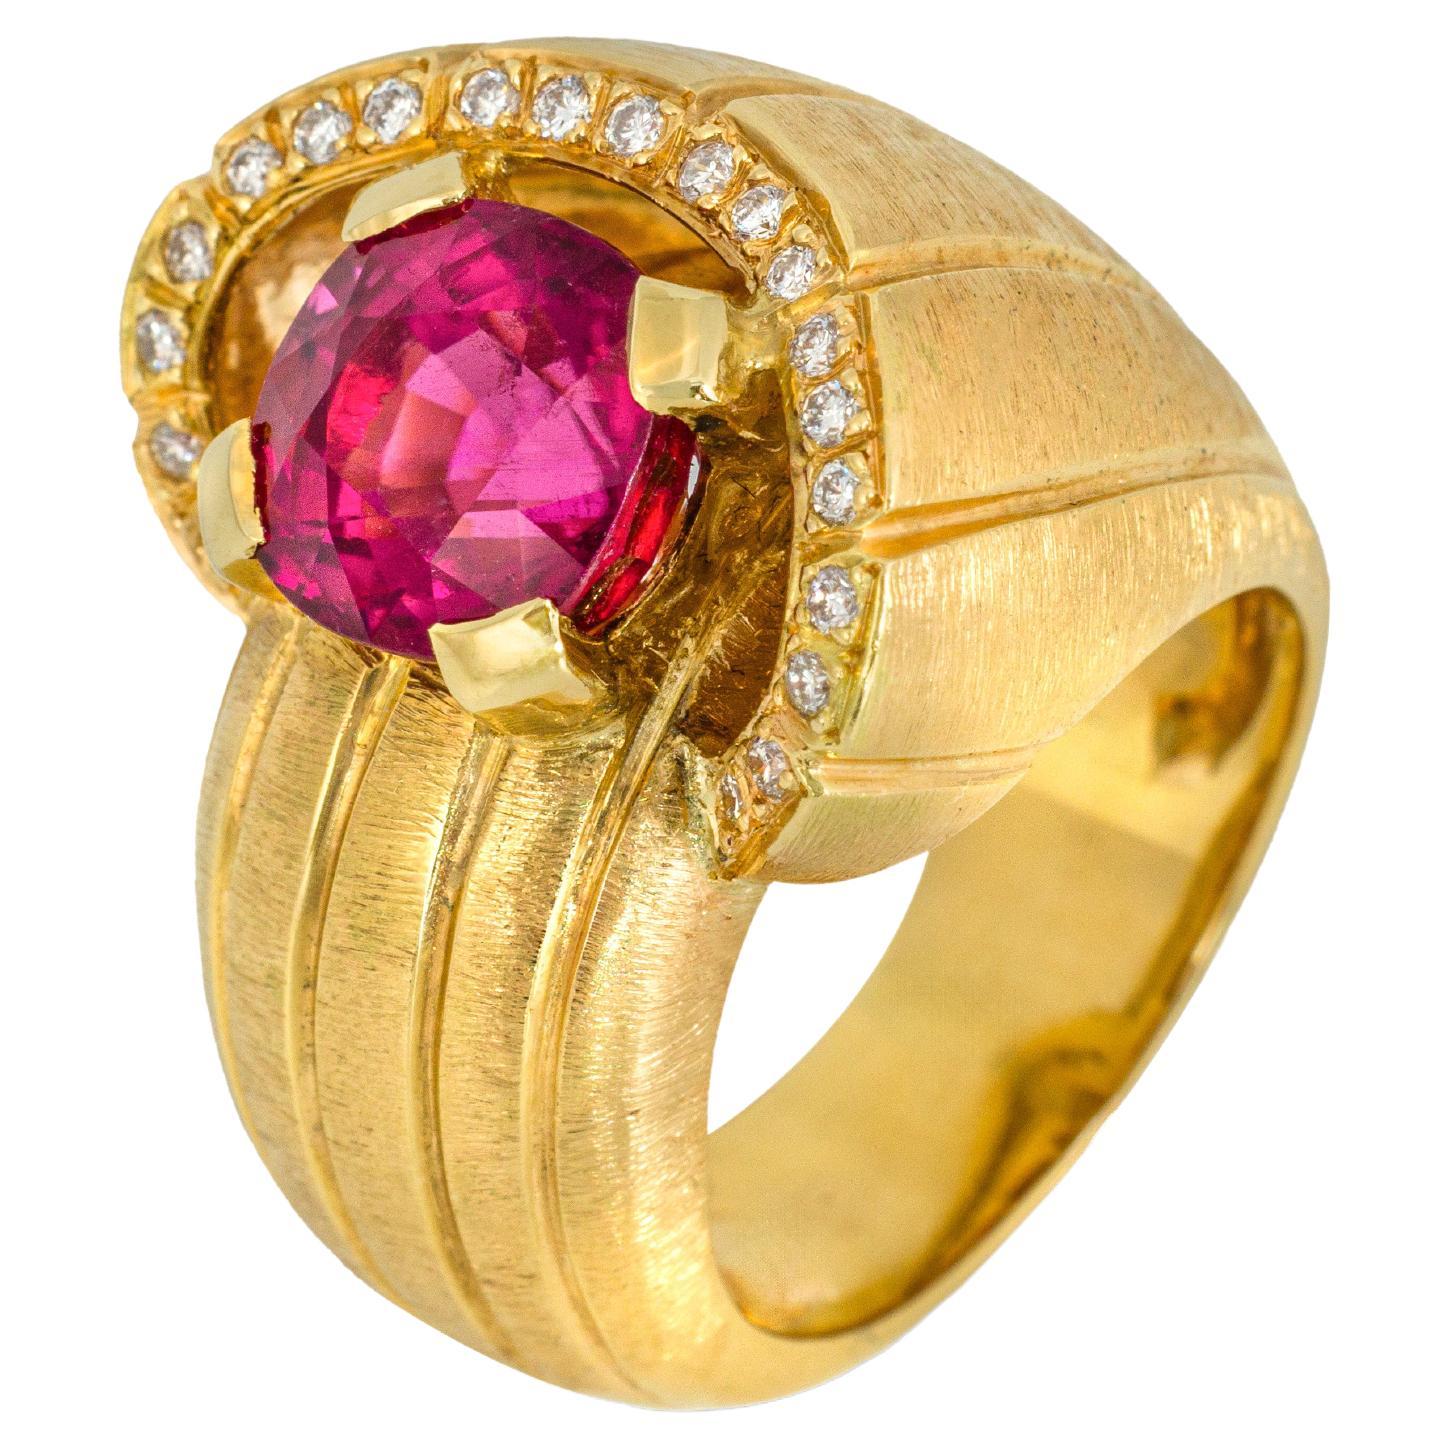 "Costis" Snail Shell Ring with a Rubellite of 4.65 carats and Diamonds  For Sale